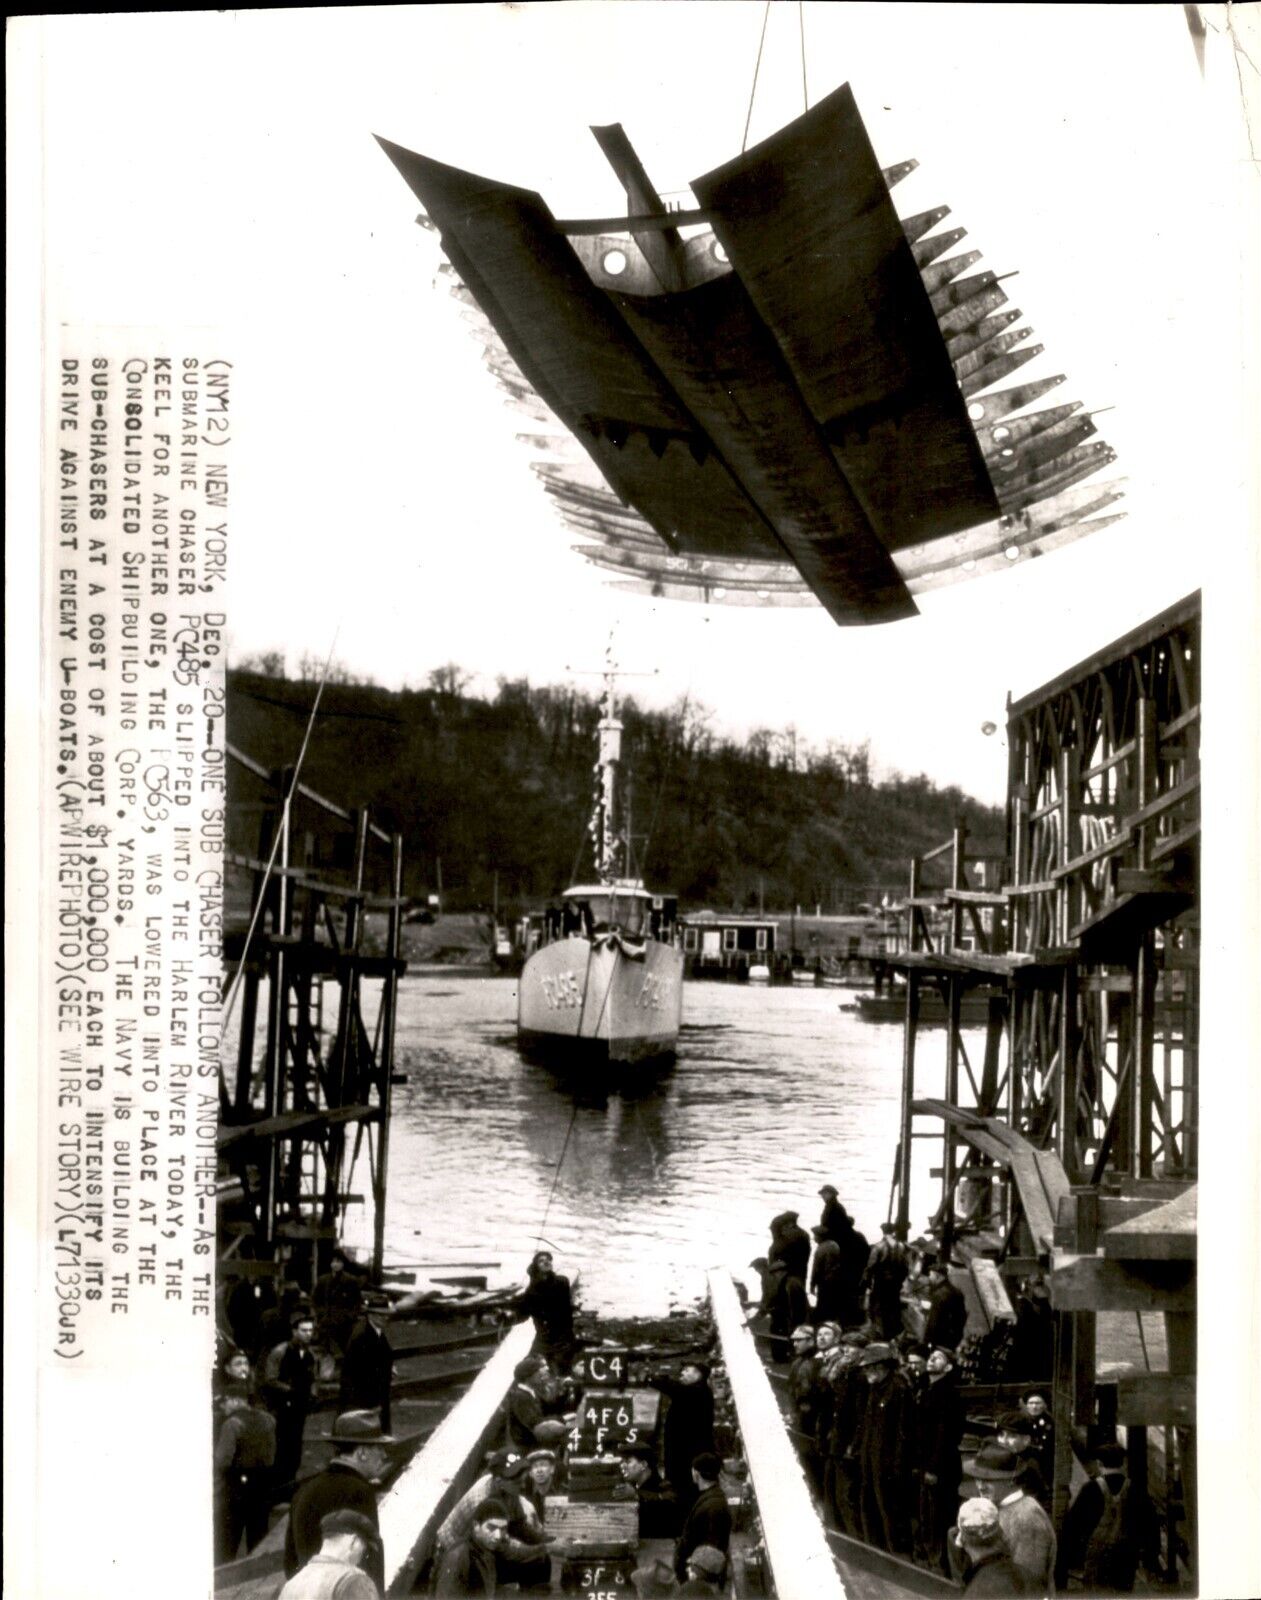 LG51 1941 Wire Photo LAYING KEEL ON SUB CHASER PC563 & PC485 LAUNCH HARLEM RIVER